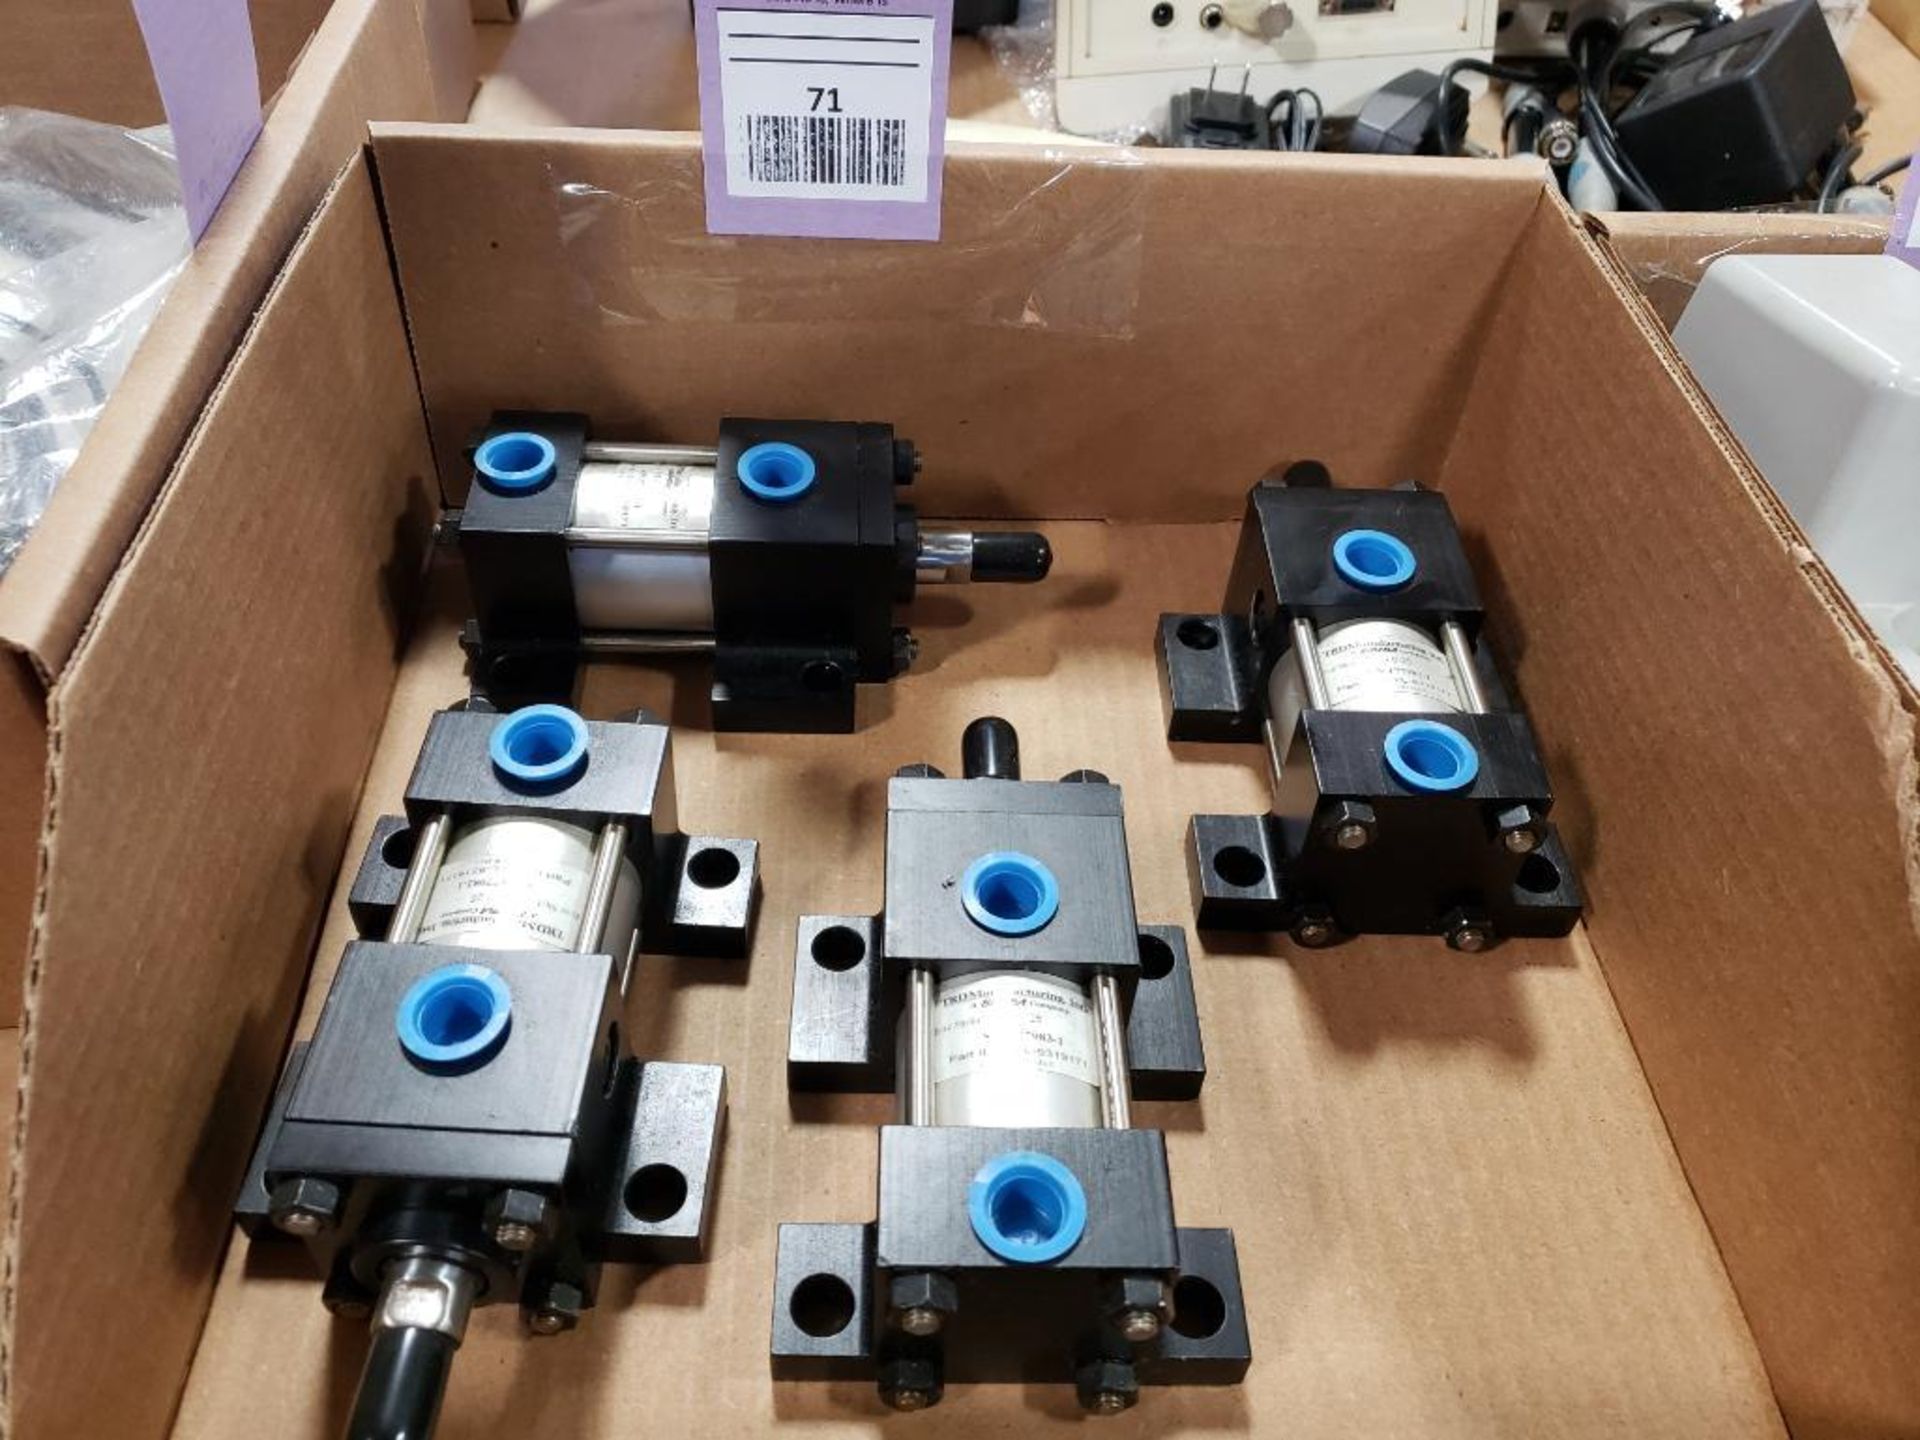 Qty 4 - Bimba cylinders. Part number CYL-9319171. New as pictured.